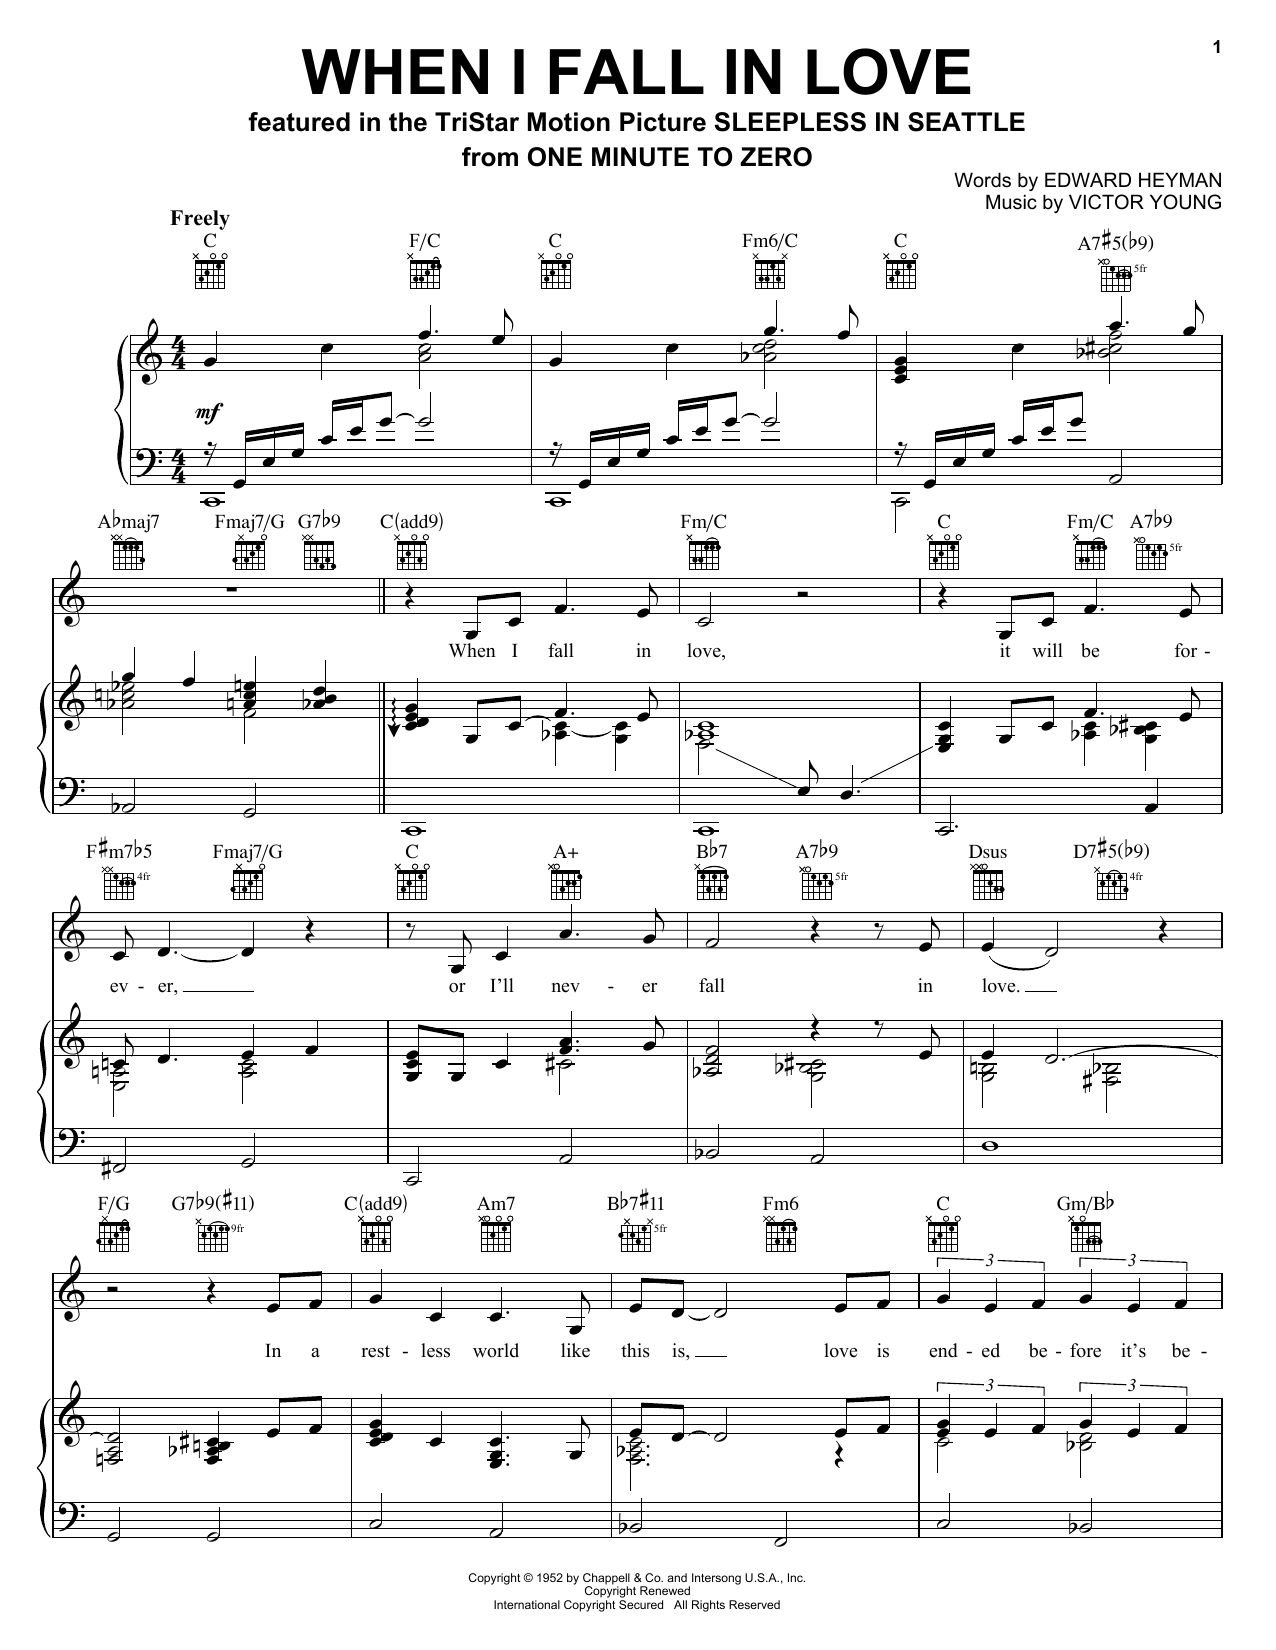 Celine Dion When I Fall In Love sheet music notes and chords. Download Printable PDF.